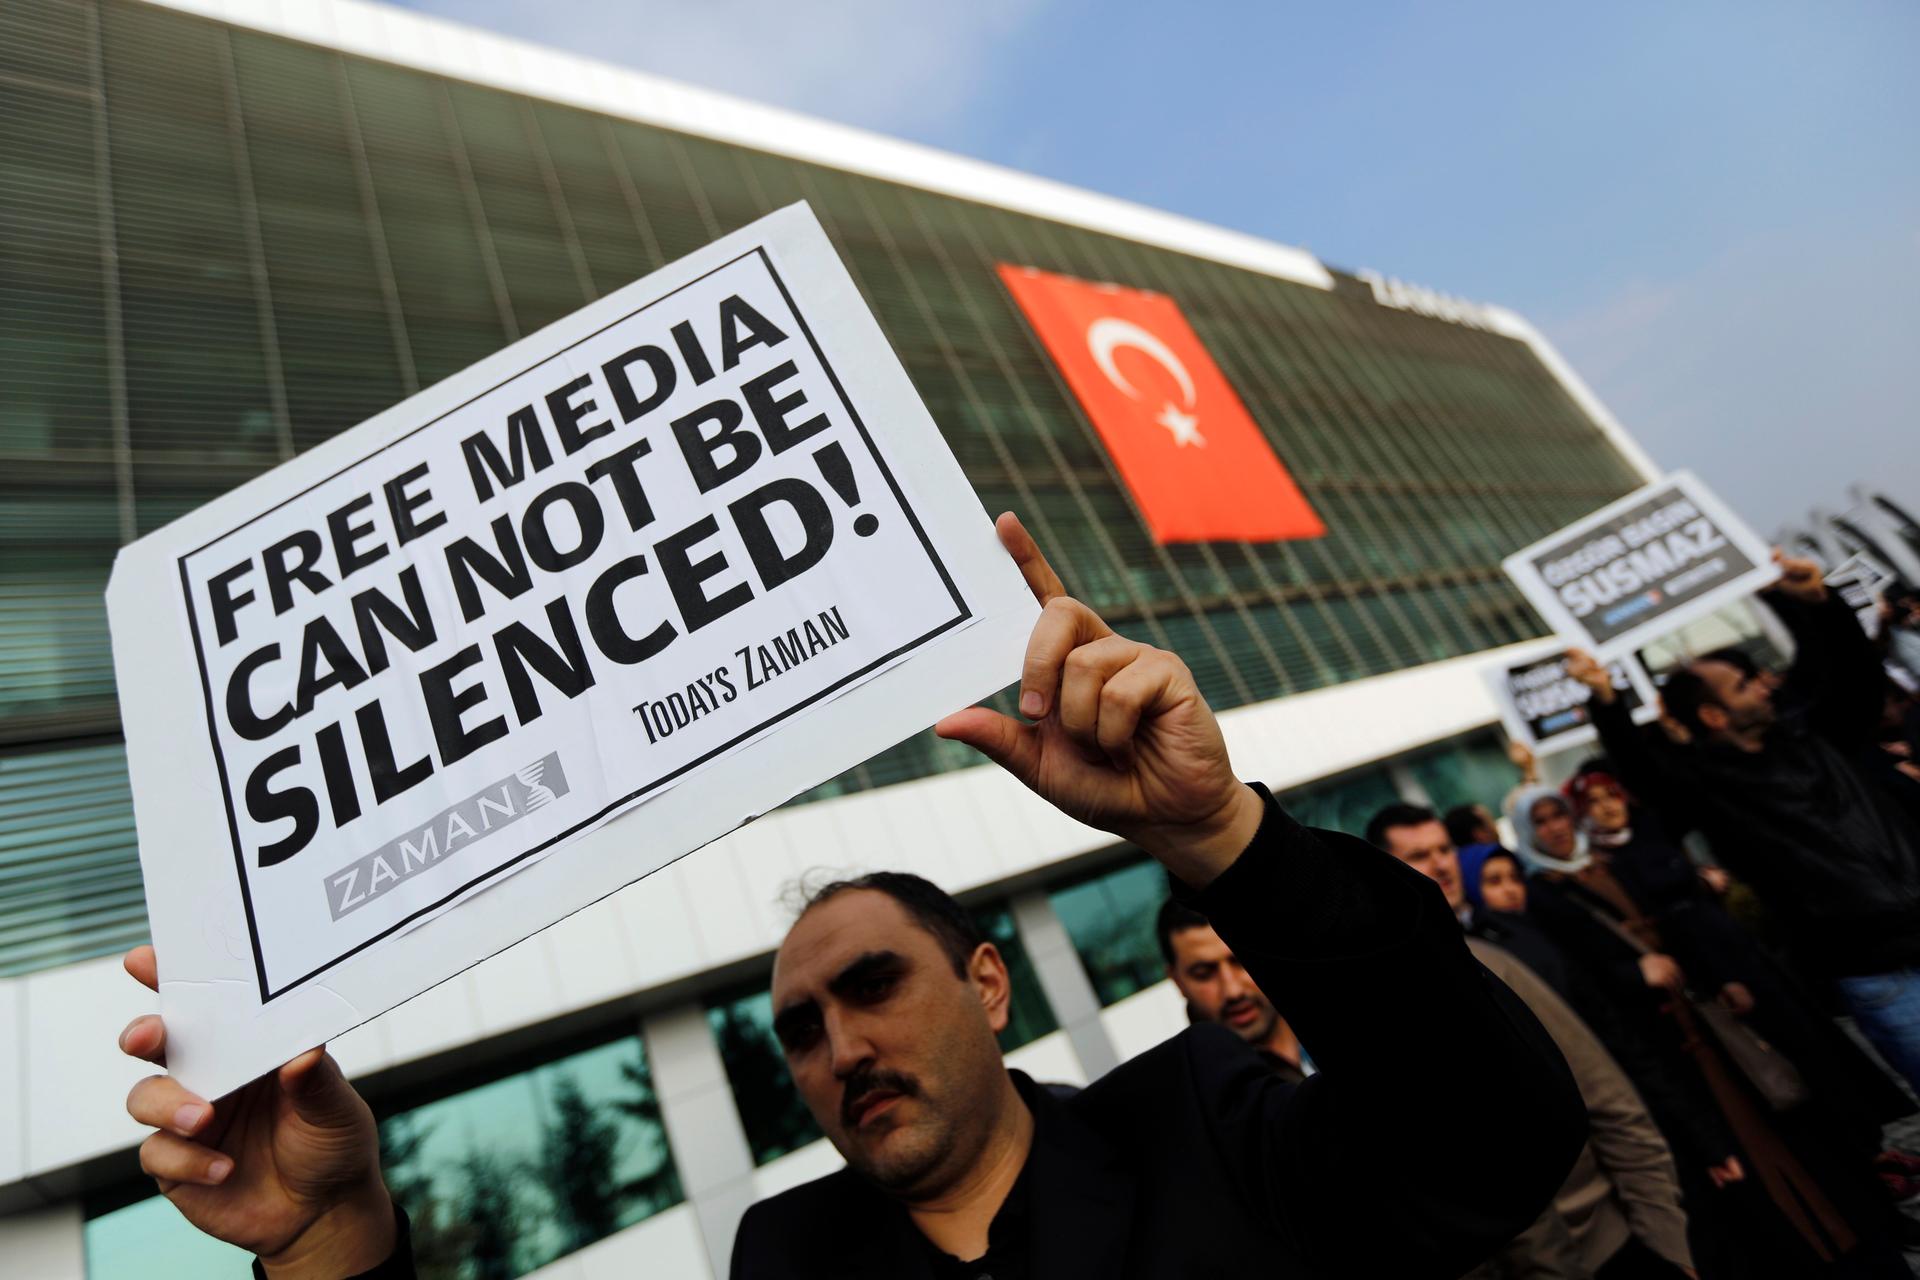 Journalists of Turkey's Zaman daily newspaper in Istanbul protest a police raid of the media outlet. 24 people including top executives and ex-police officers were round up in what Turkish president Tayyip Erdogan calls a terrorist network conspiring to t